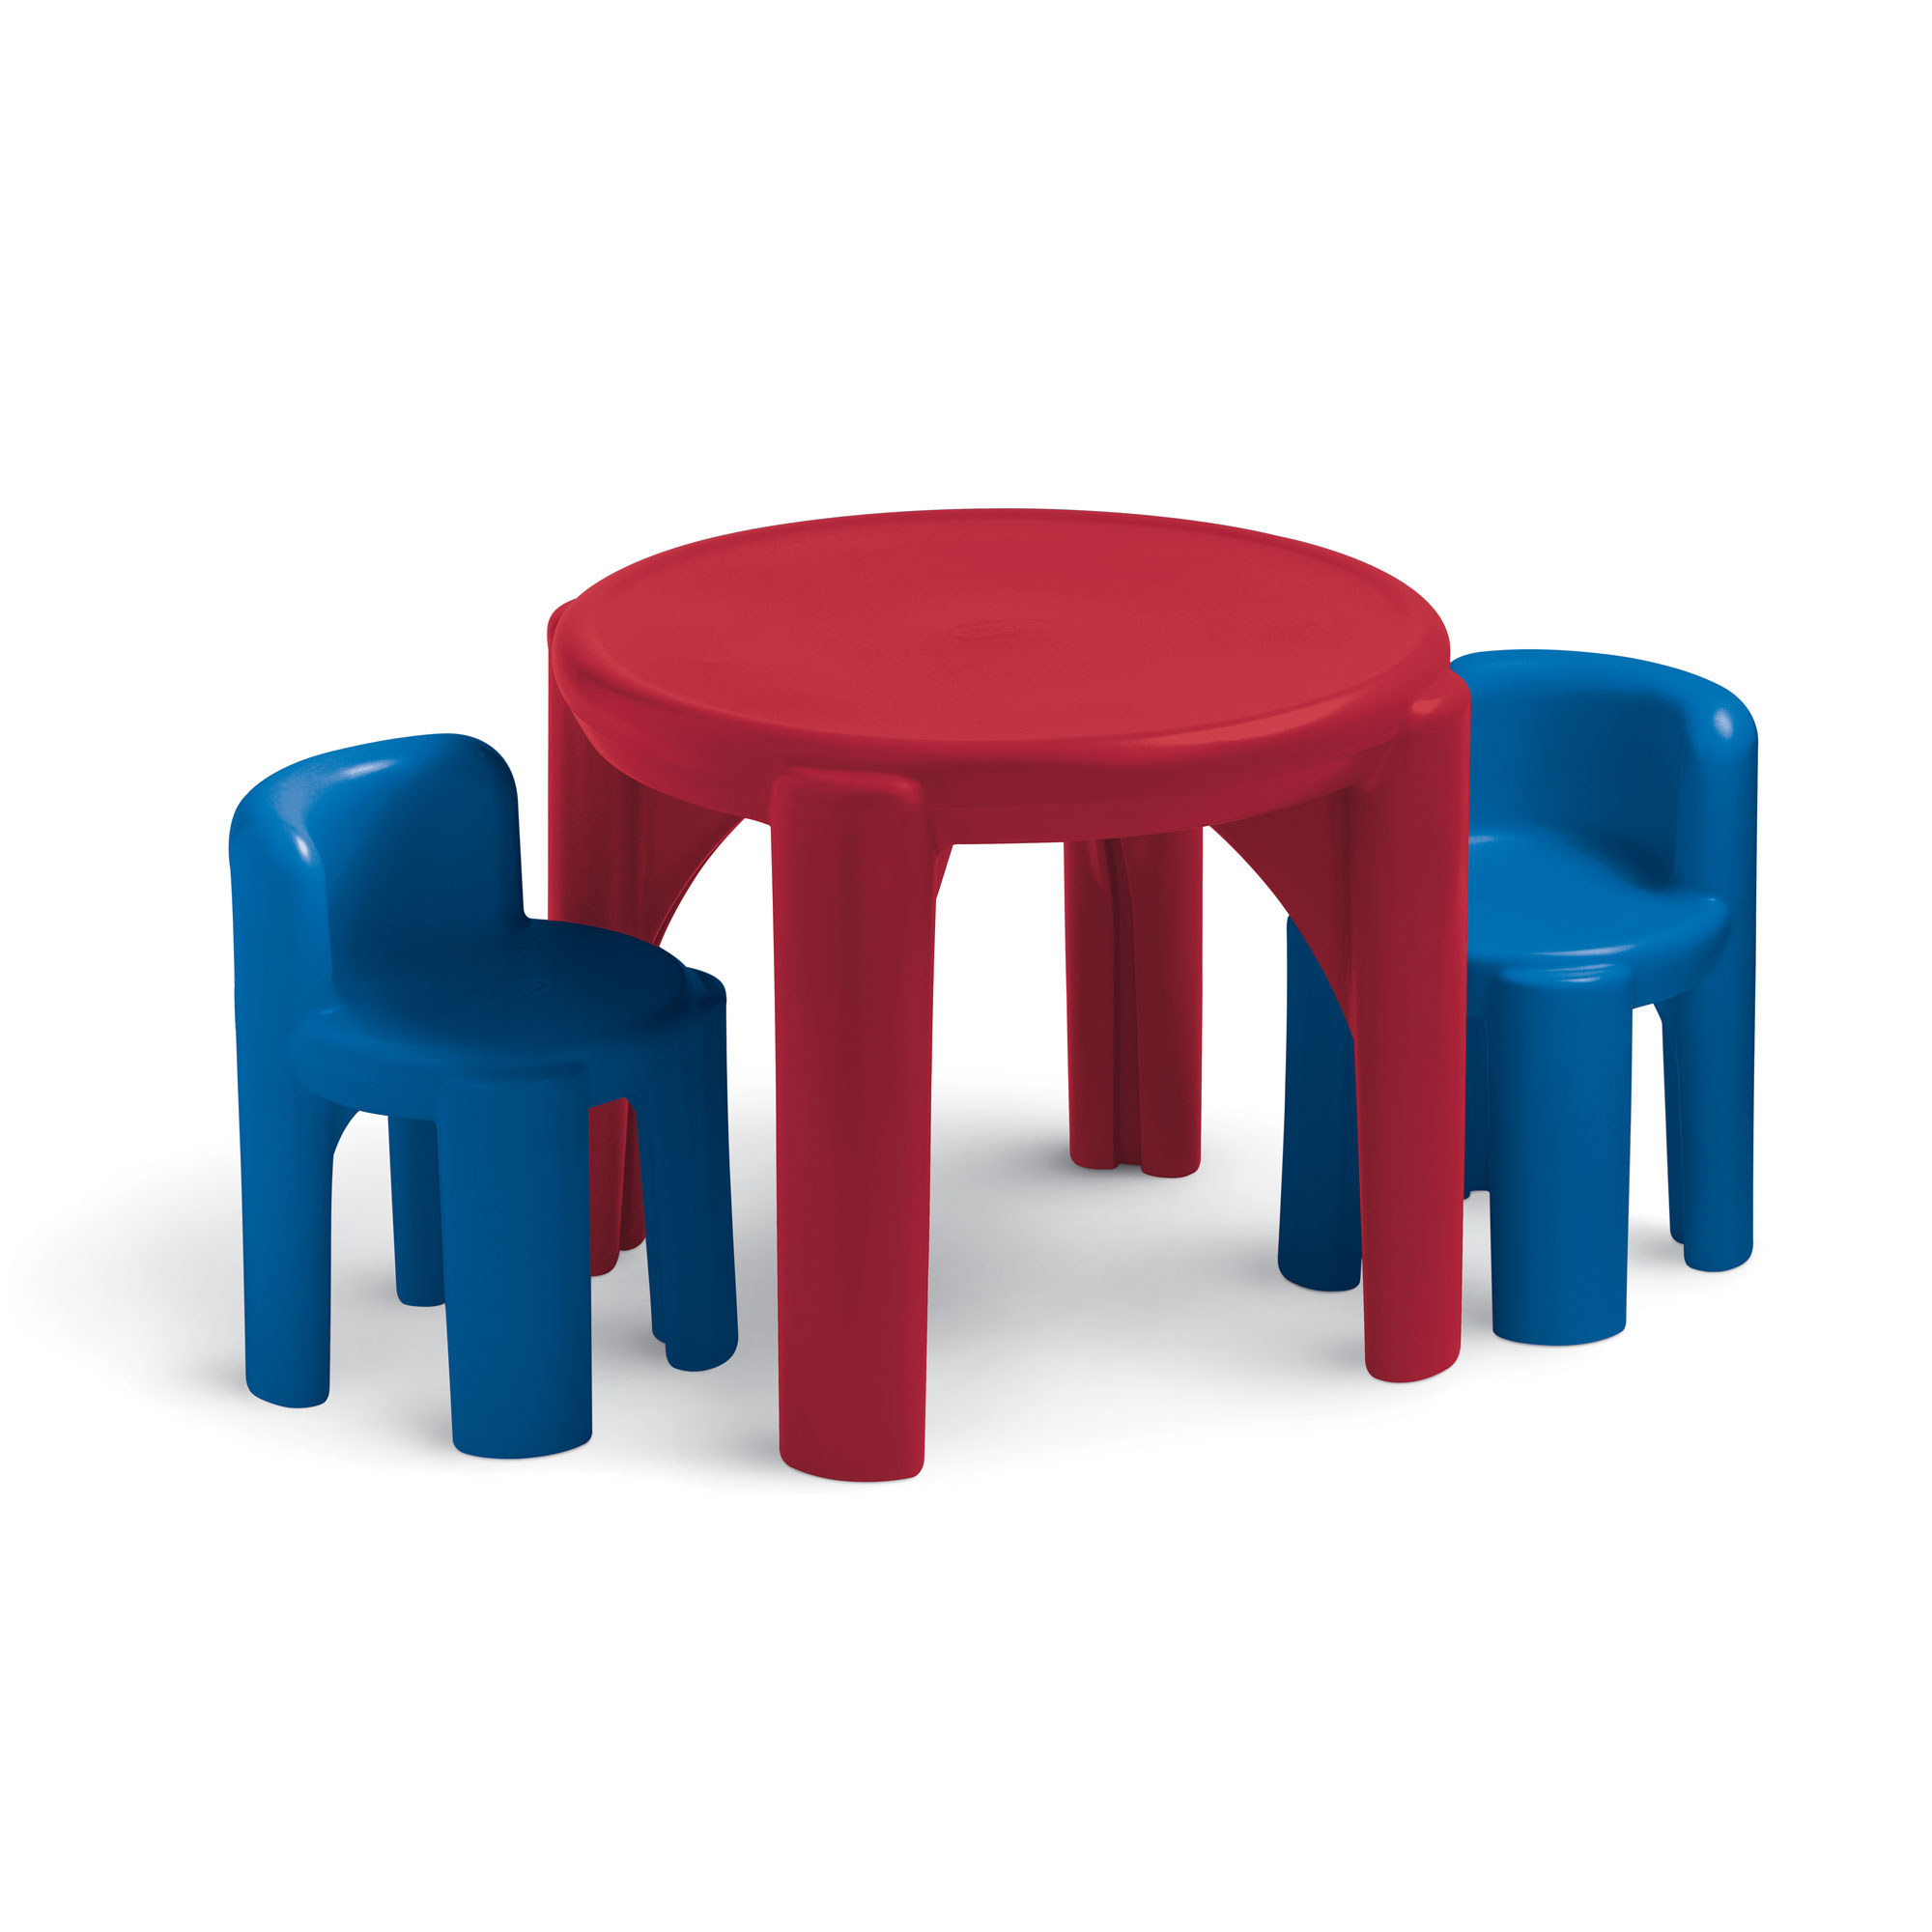 Table & Chairs Set-Primary Colors - image 3 of 4